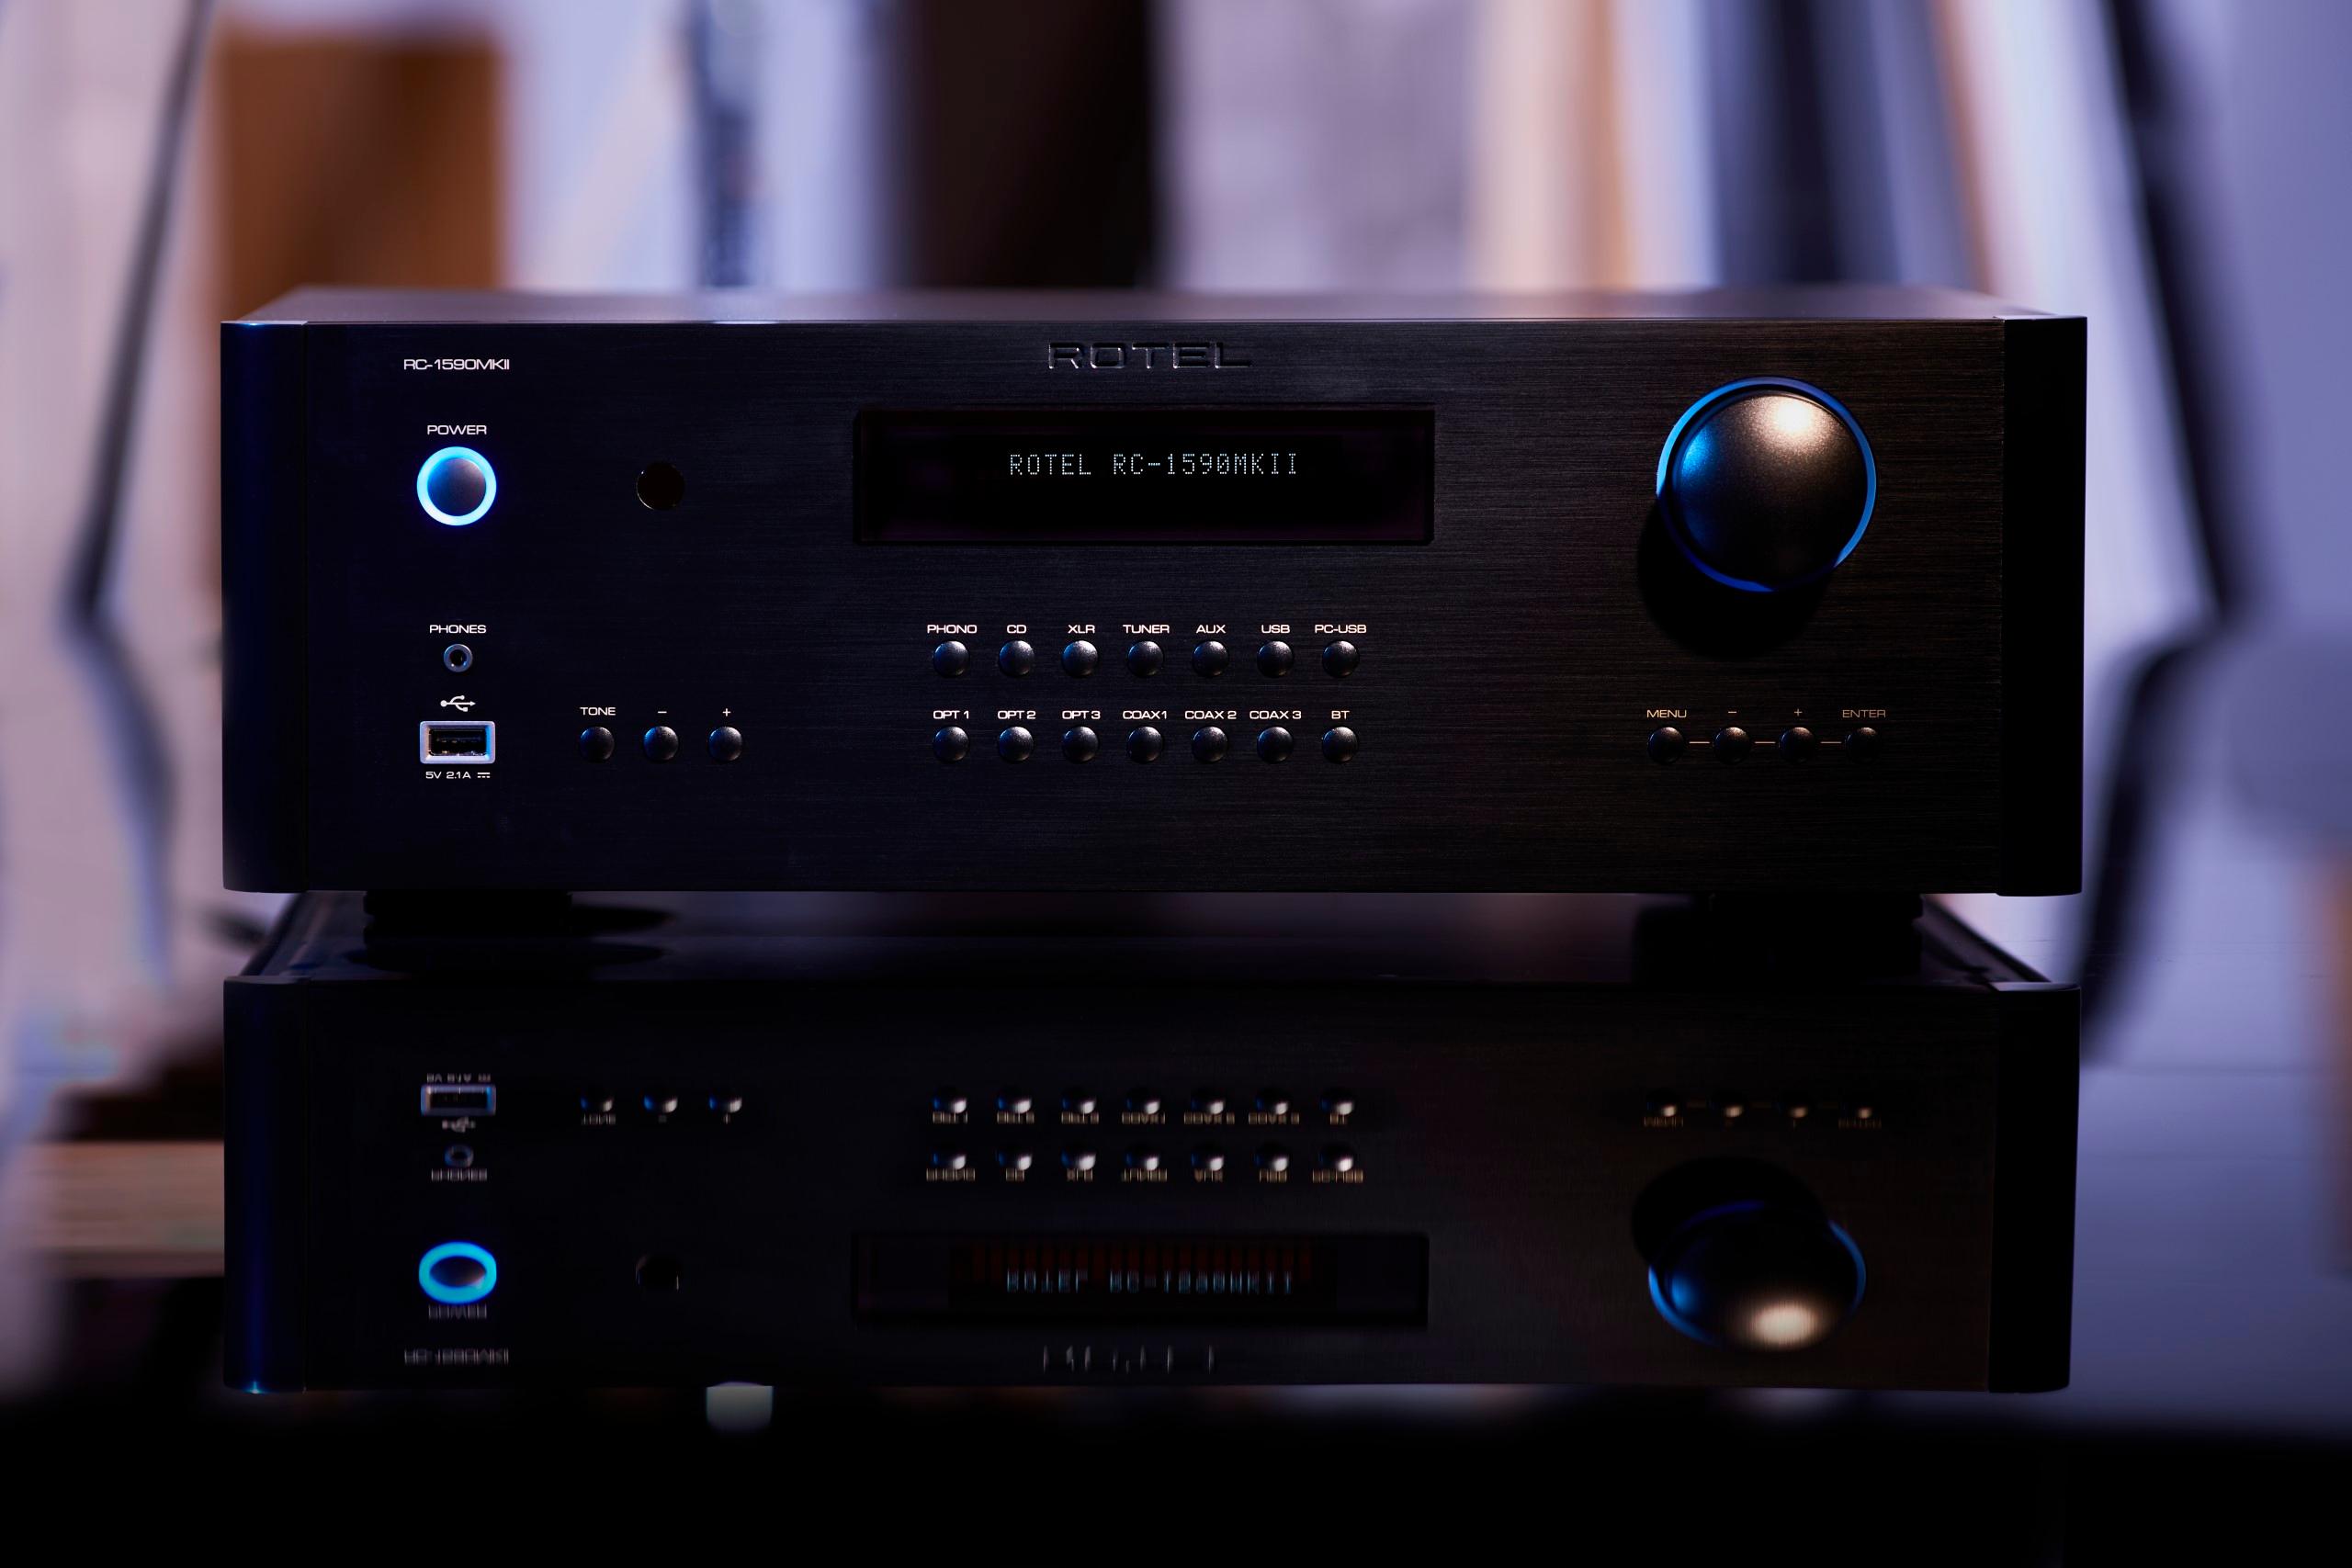 Rotel's latest pre-amplifiers are excellent performers jam-packed with inputs and solid engineering.